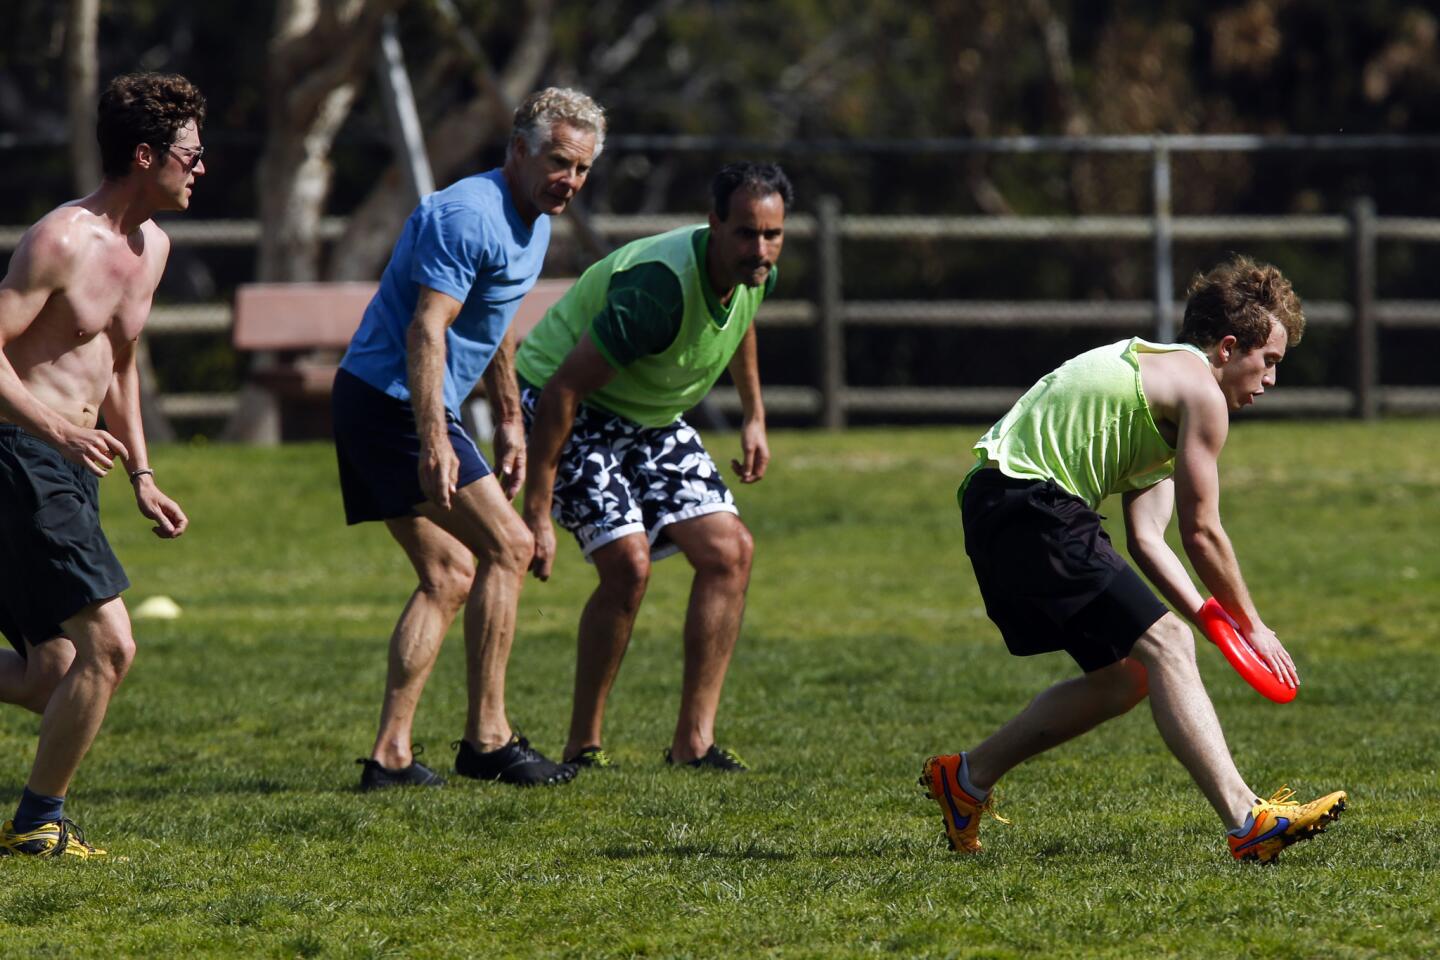 With Ultimate Frisbee Sport Catching On, Researchers Track Pro